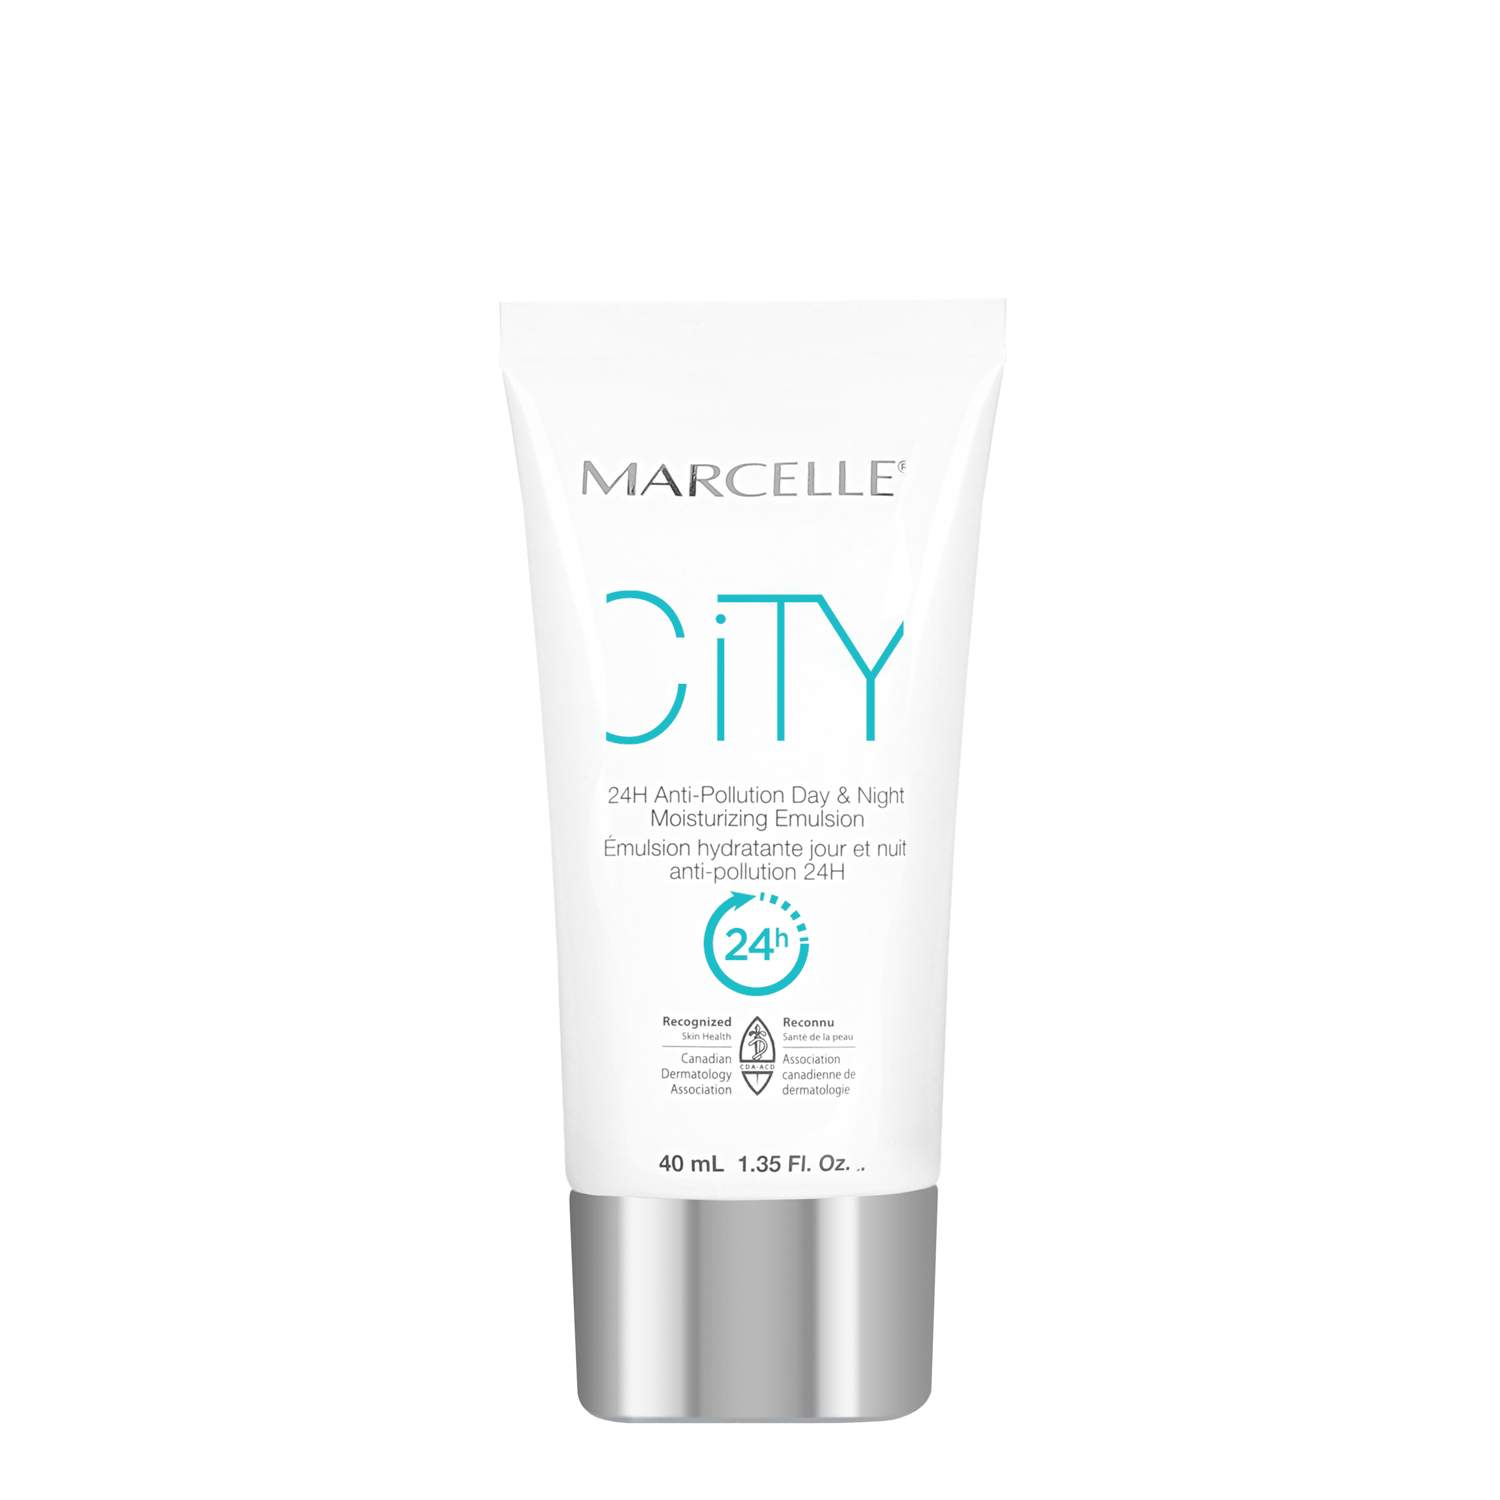 Marcelle CITY 24H Anti-Pollution Day & Night Moisturizing Emulsion